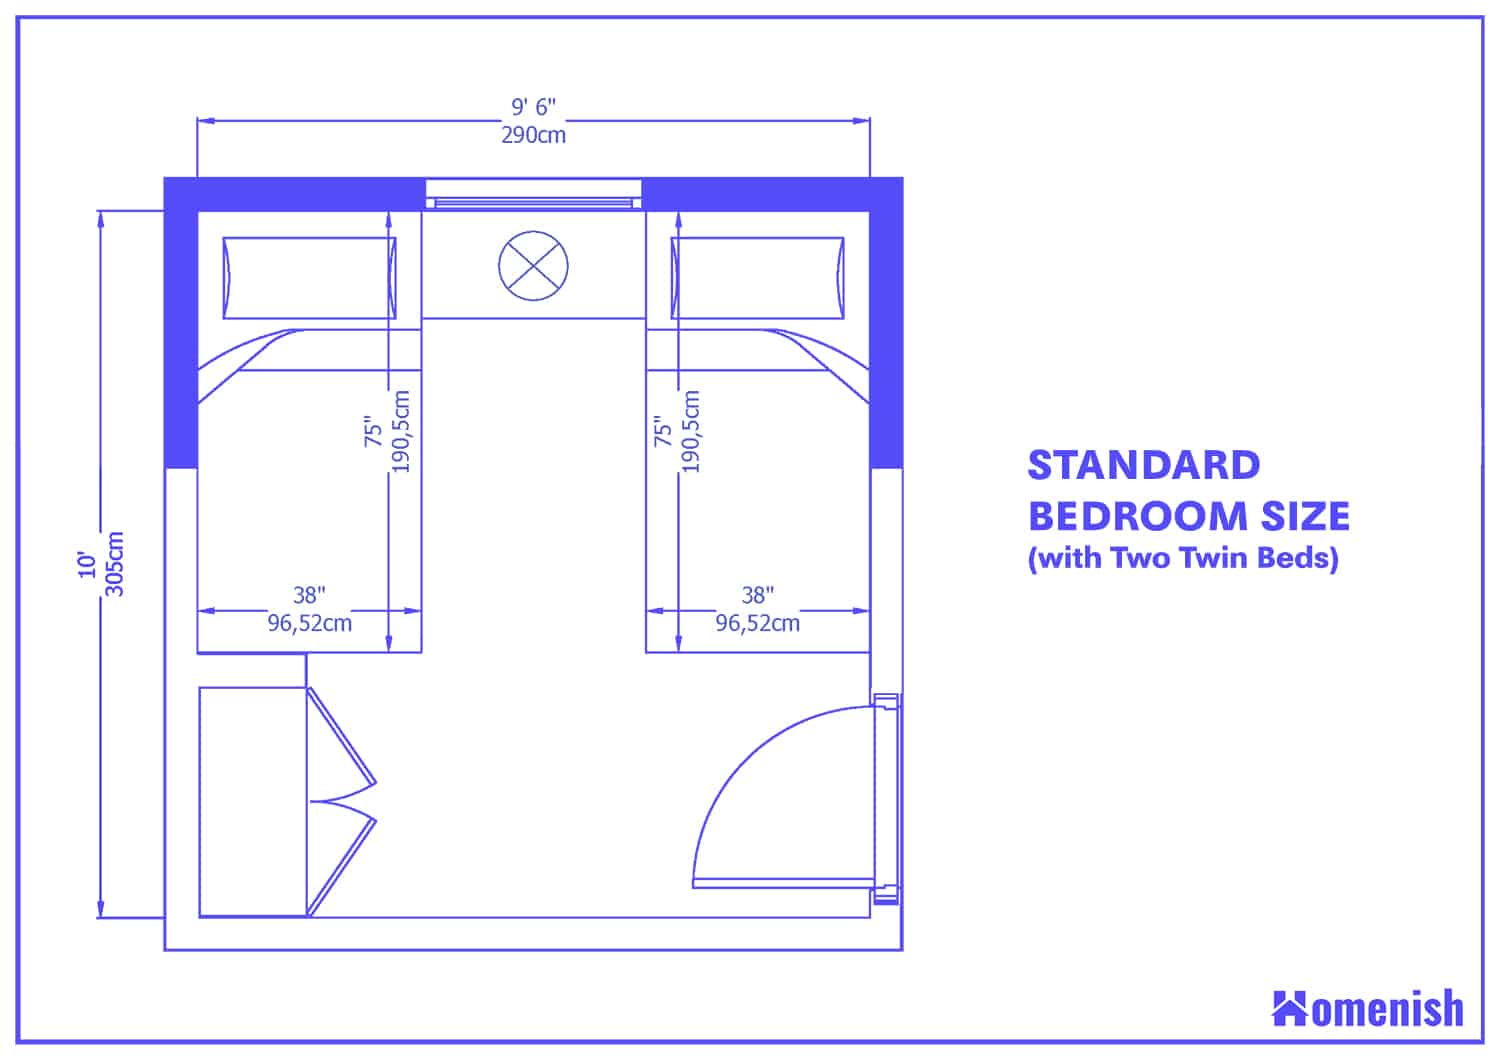 Average Bedroom Size And Layout Guide, What Are Dimensions For Twin Bed